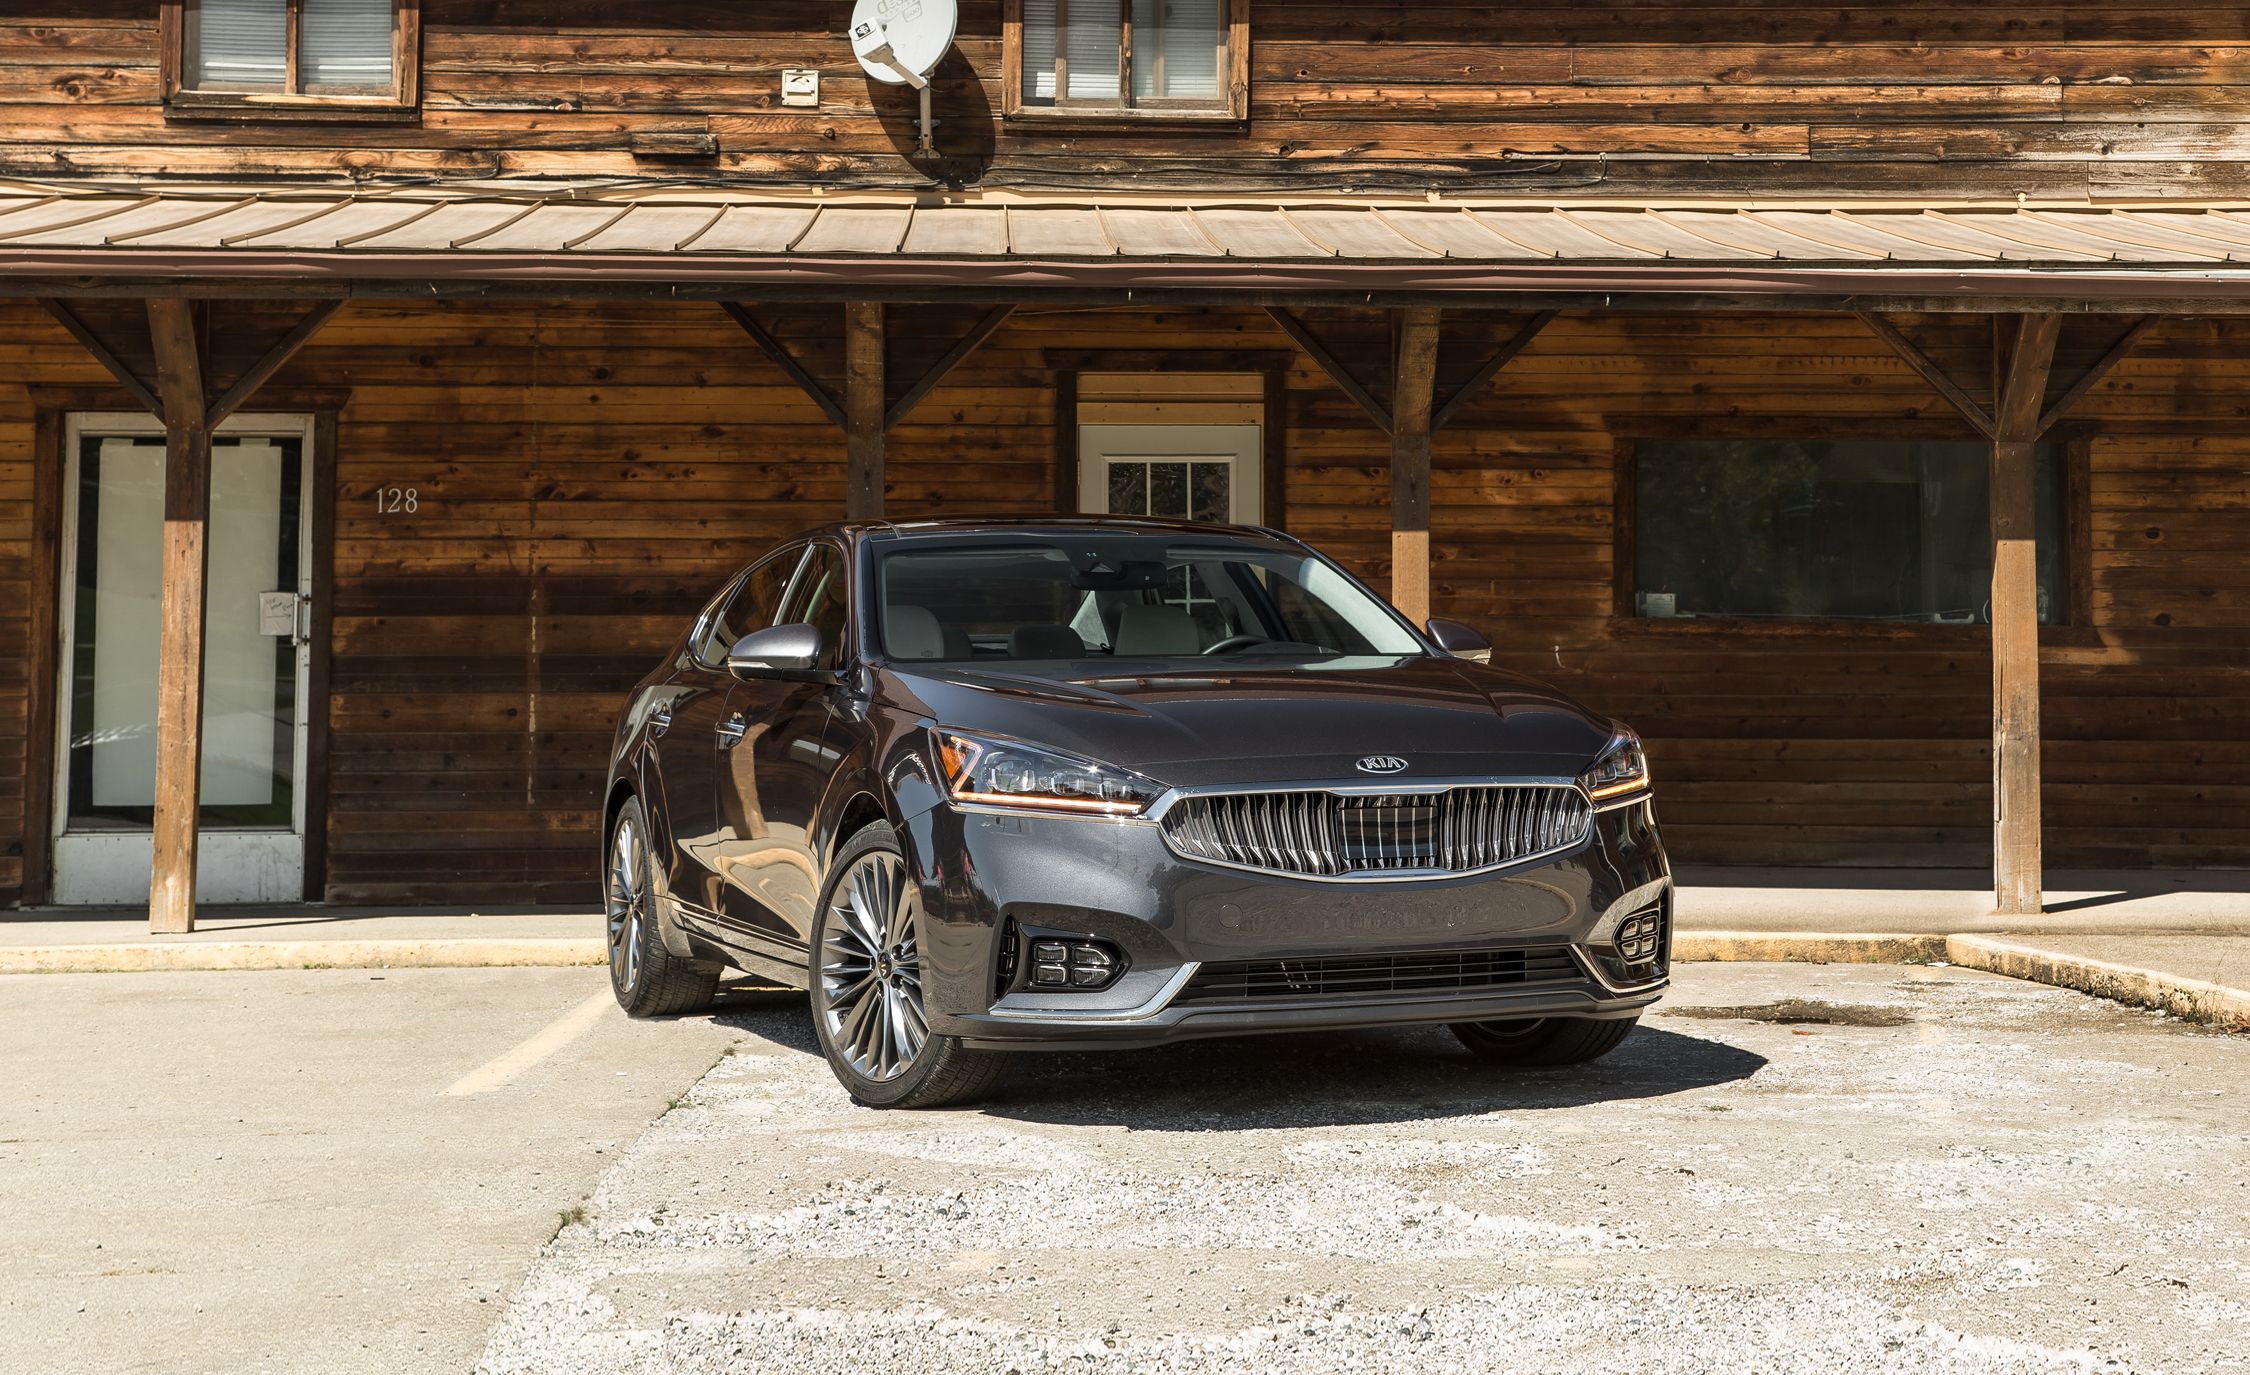 2019 Kia Cadenza Review, Pricing, and Specs